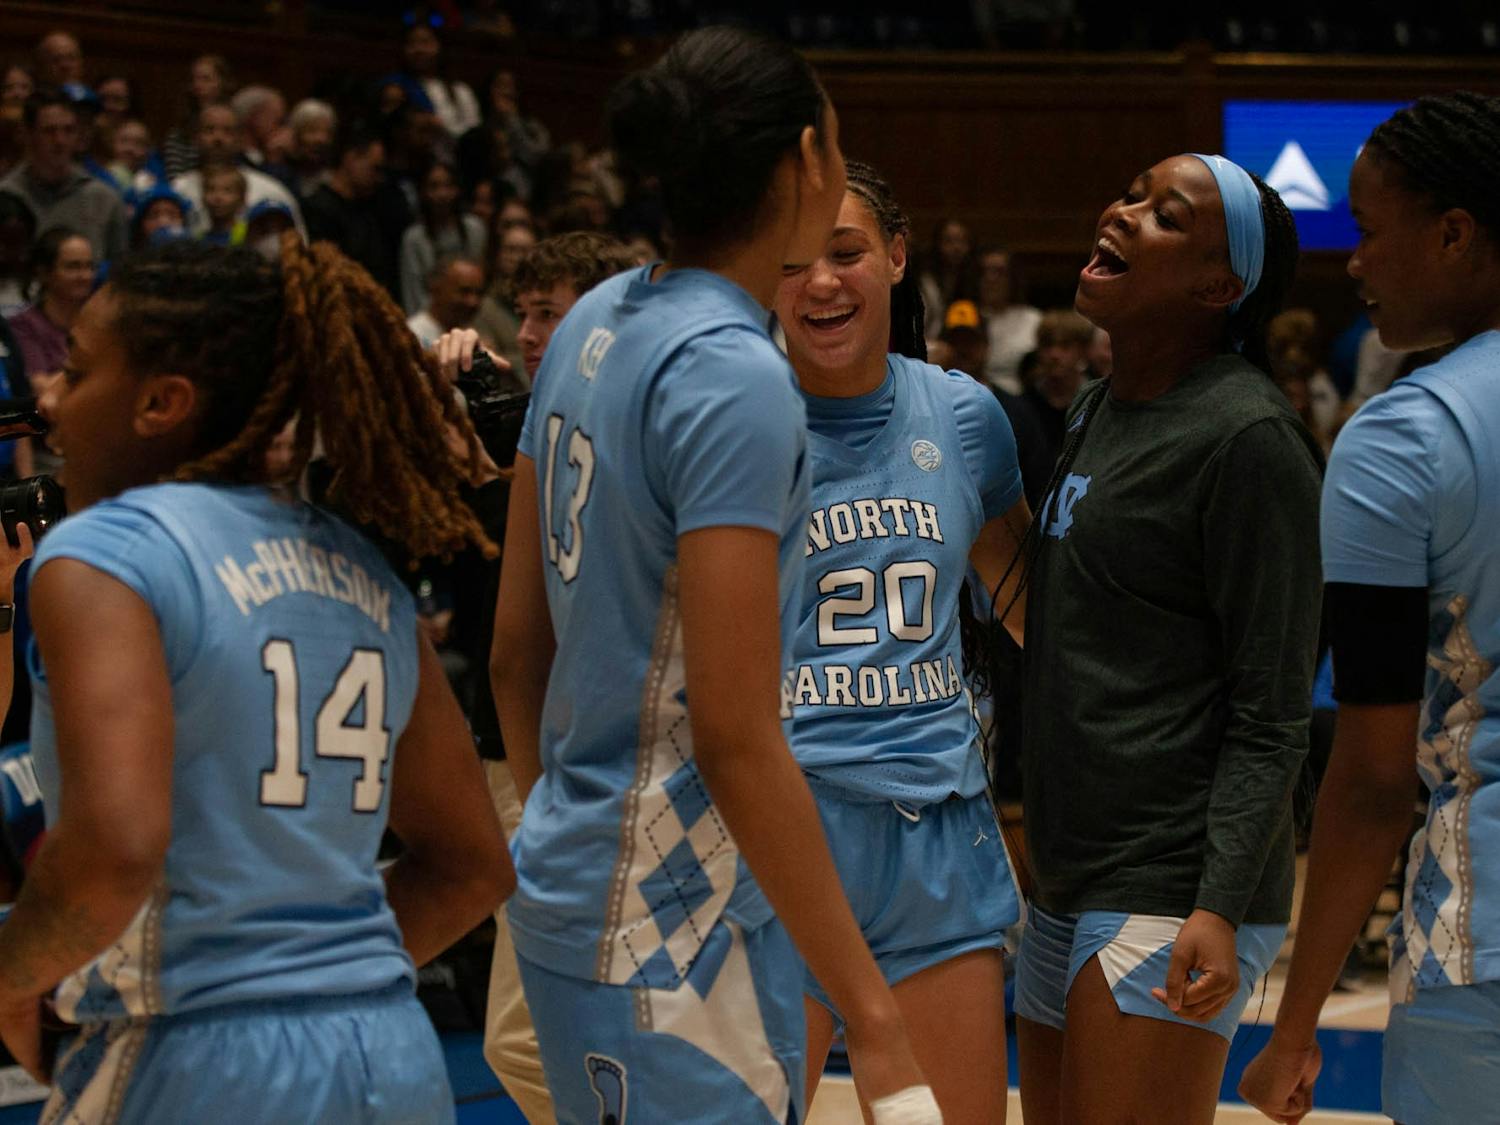 UNC women's basketball players celebrate during the women’s basketball game against Duke on Sunday, Feb. 26, 2023, at Cameron Indoor Stadium. UNC defeated Duke 45-41.